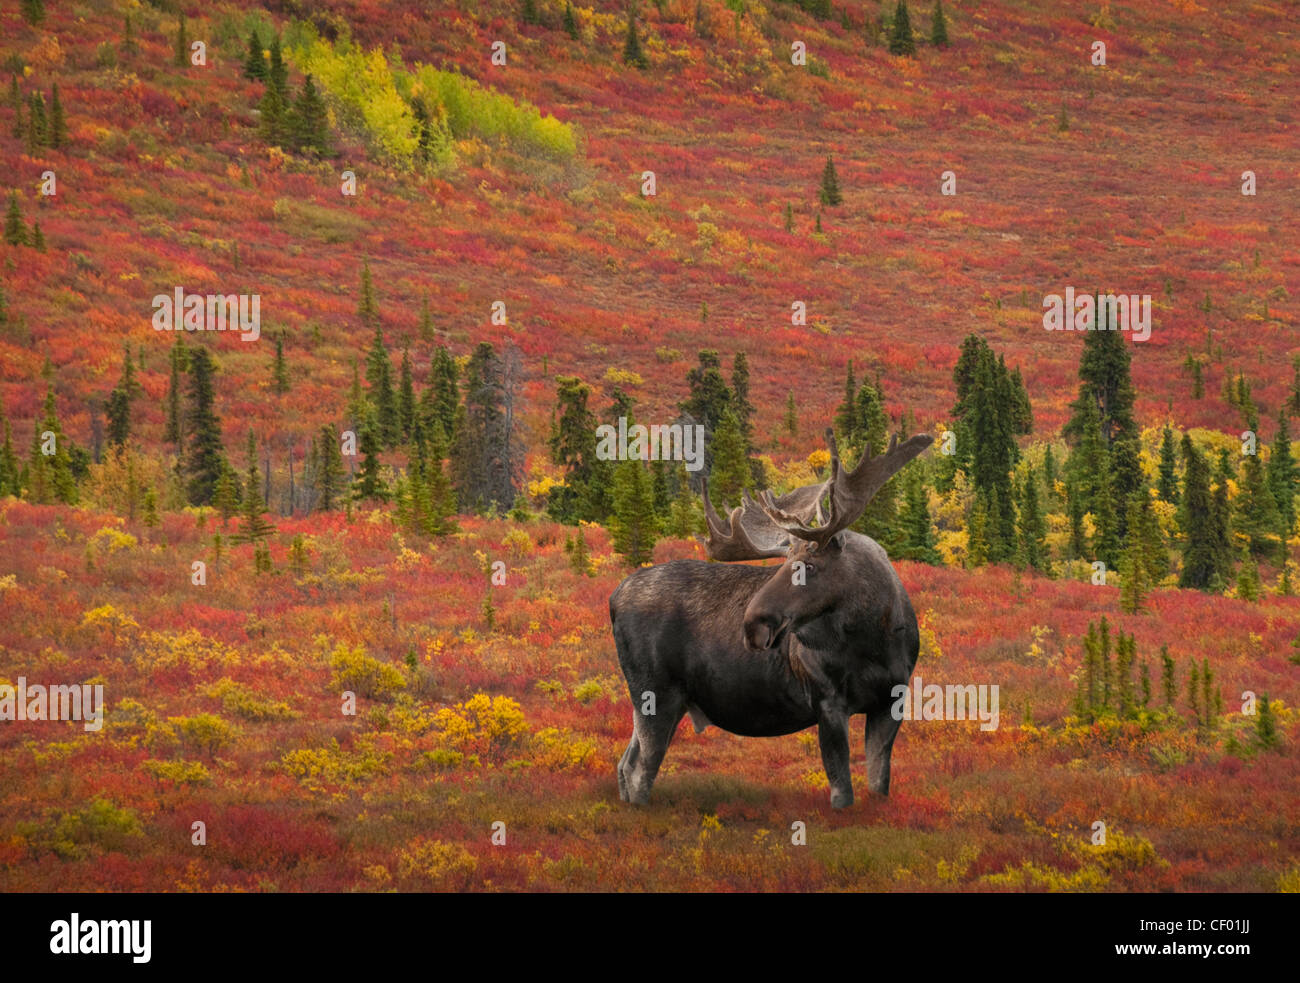 Bull Moose (Alces alces) with antlers in velvet stands knee deep in the colorful tundra of Denali National Park, Alaska. Stock Photo